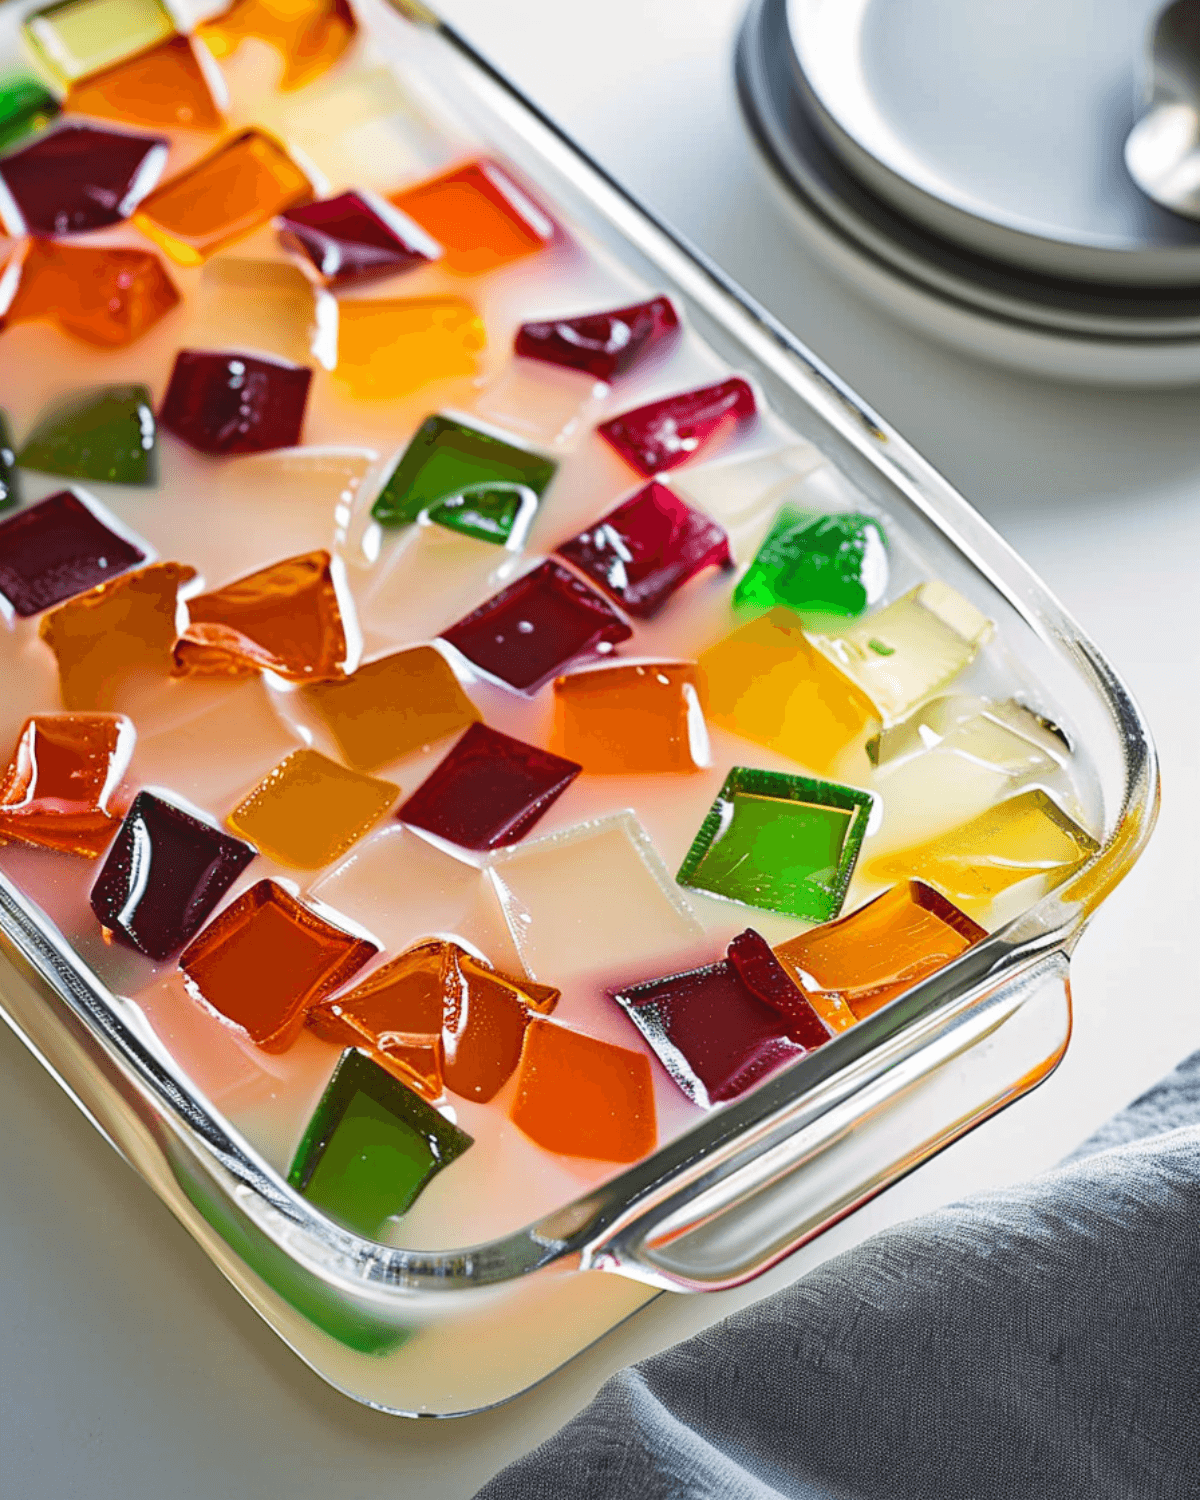 Colorful cubes arranged in a glass dish.